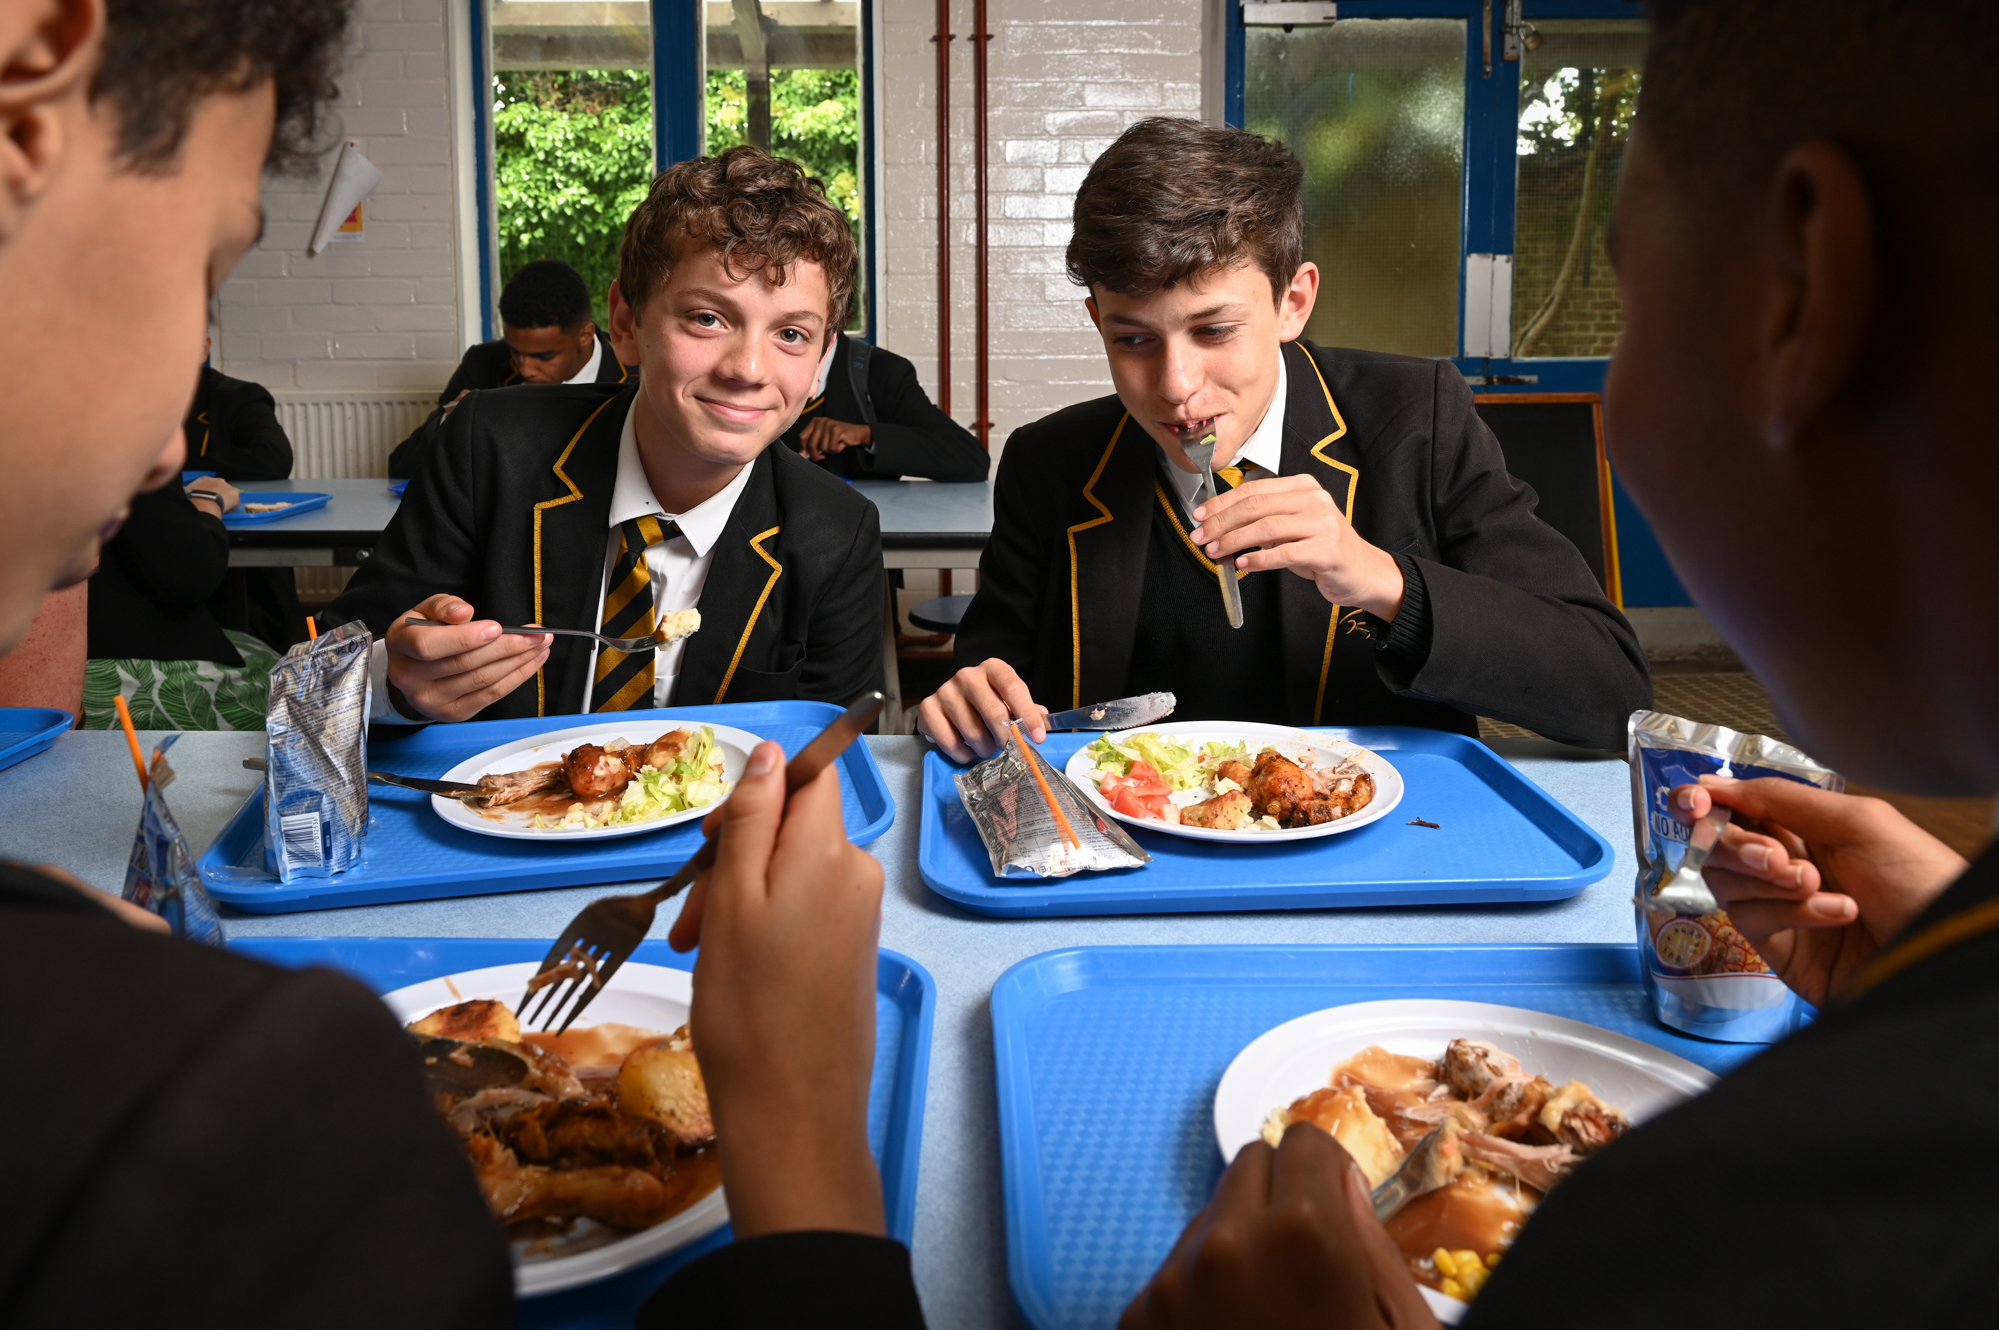 Feeding Young Minds Handf Launching Free School Lunches London